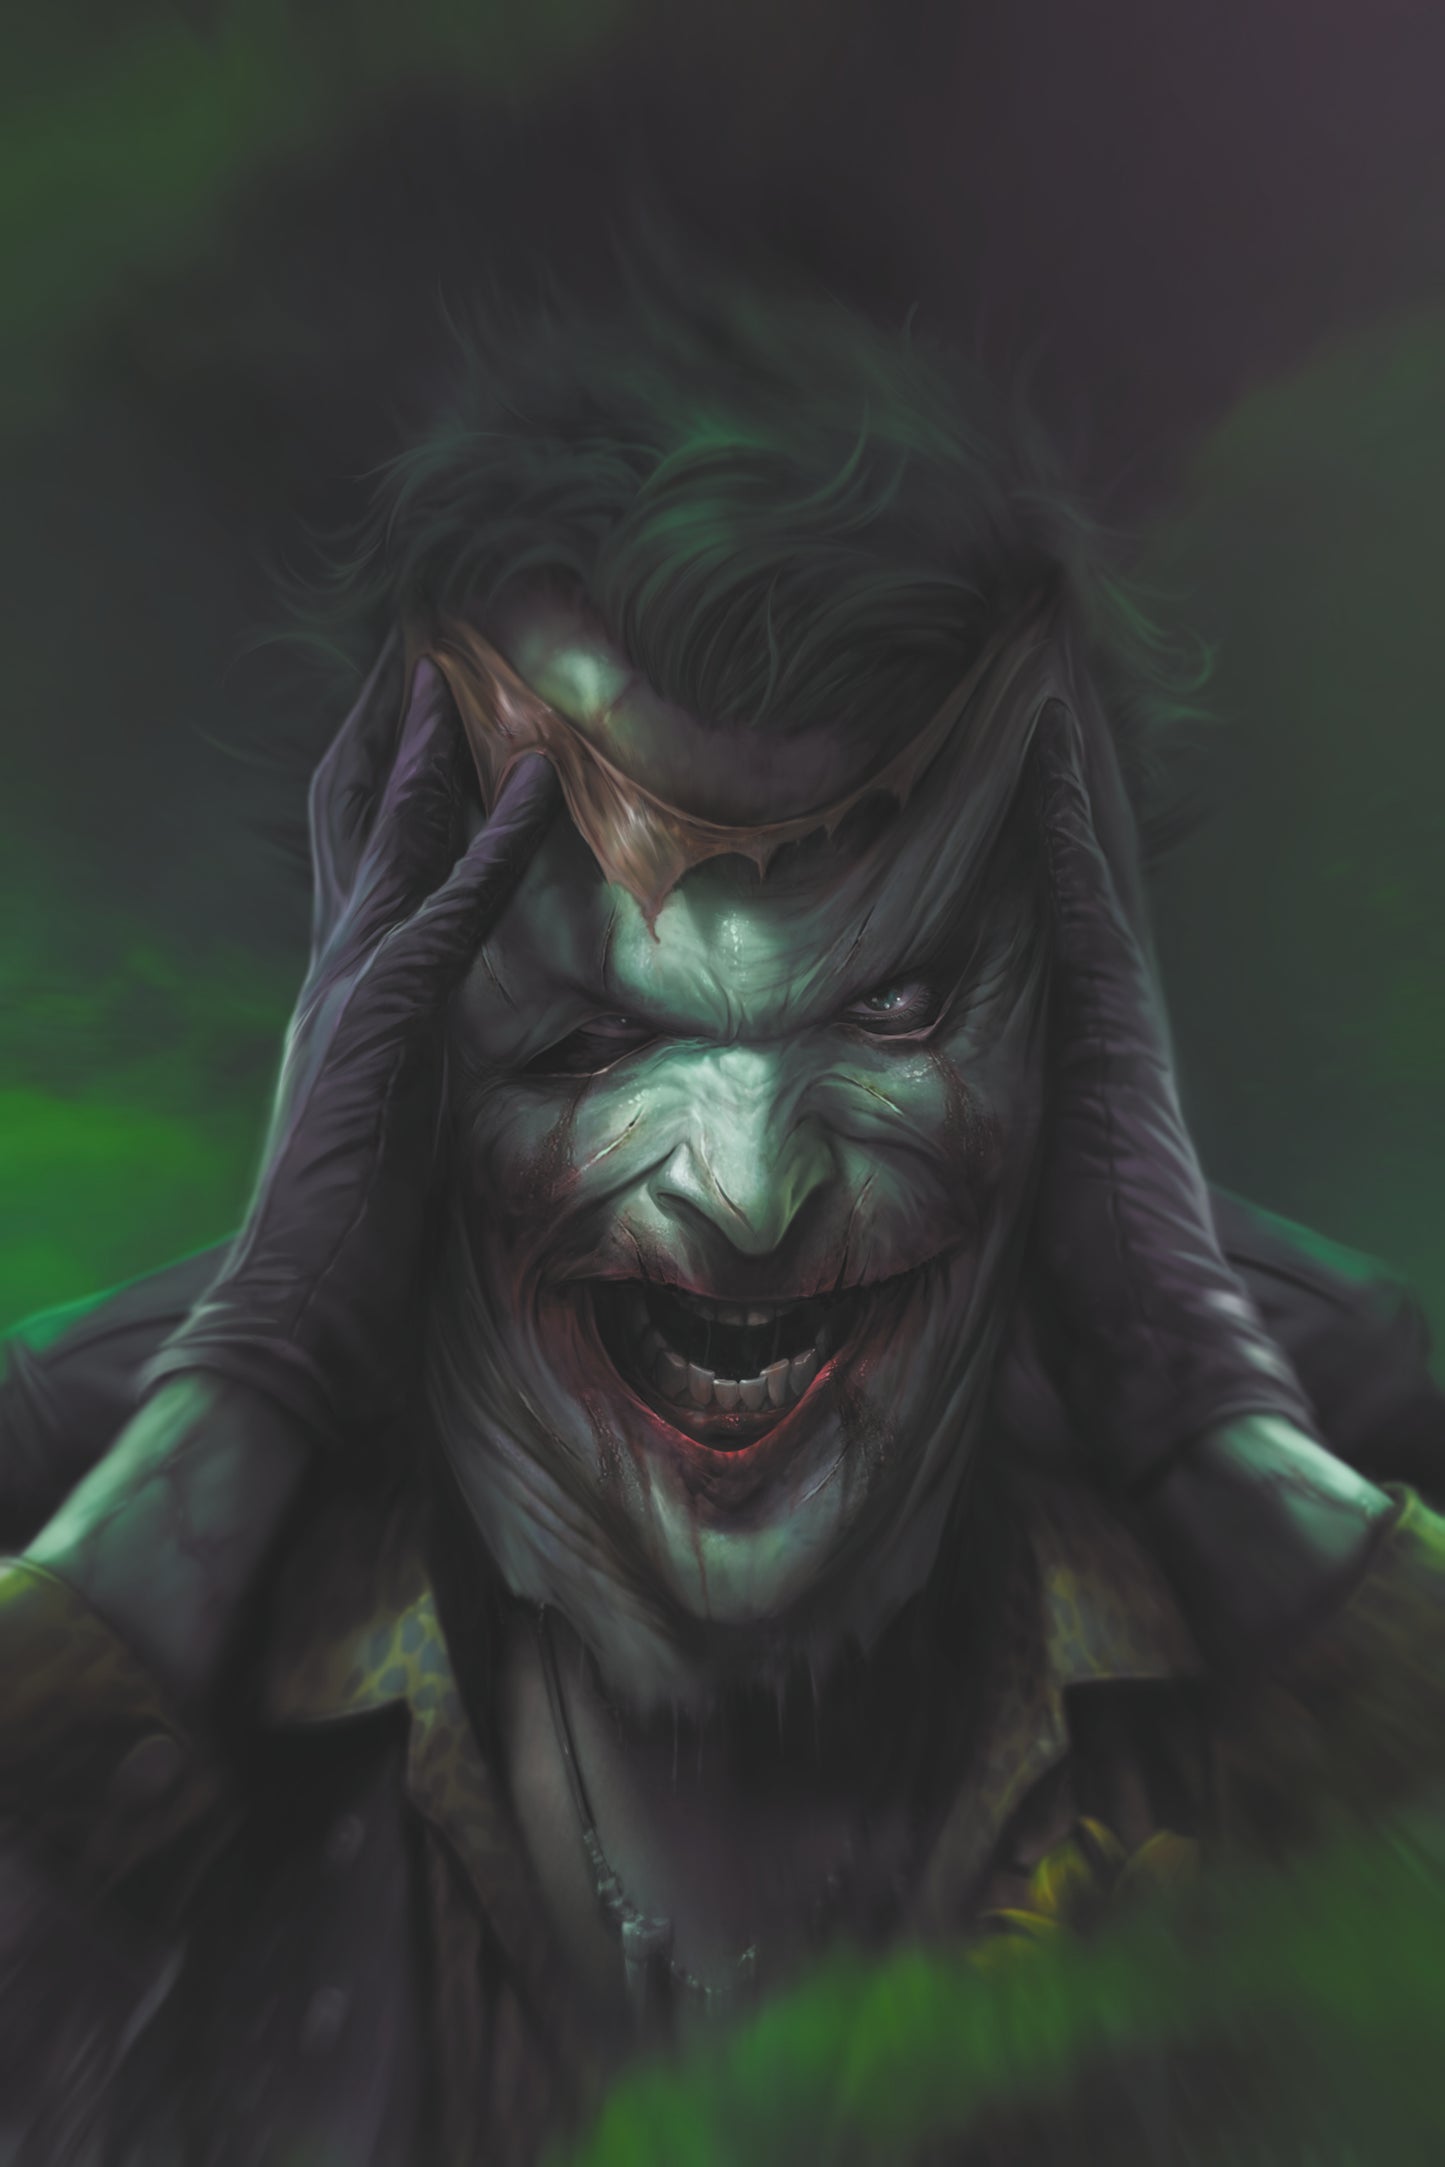 The Joker: The Man Who Stopped Laughing